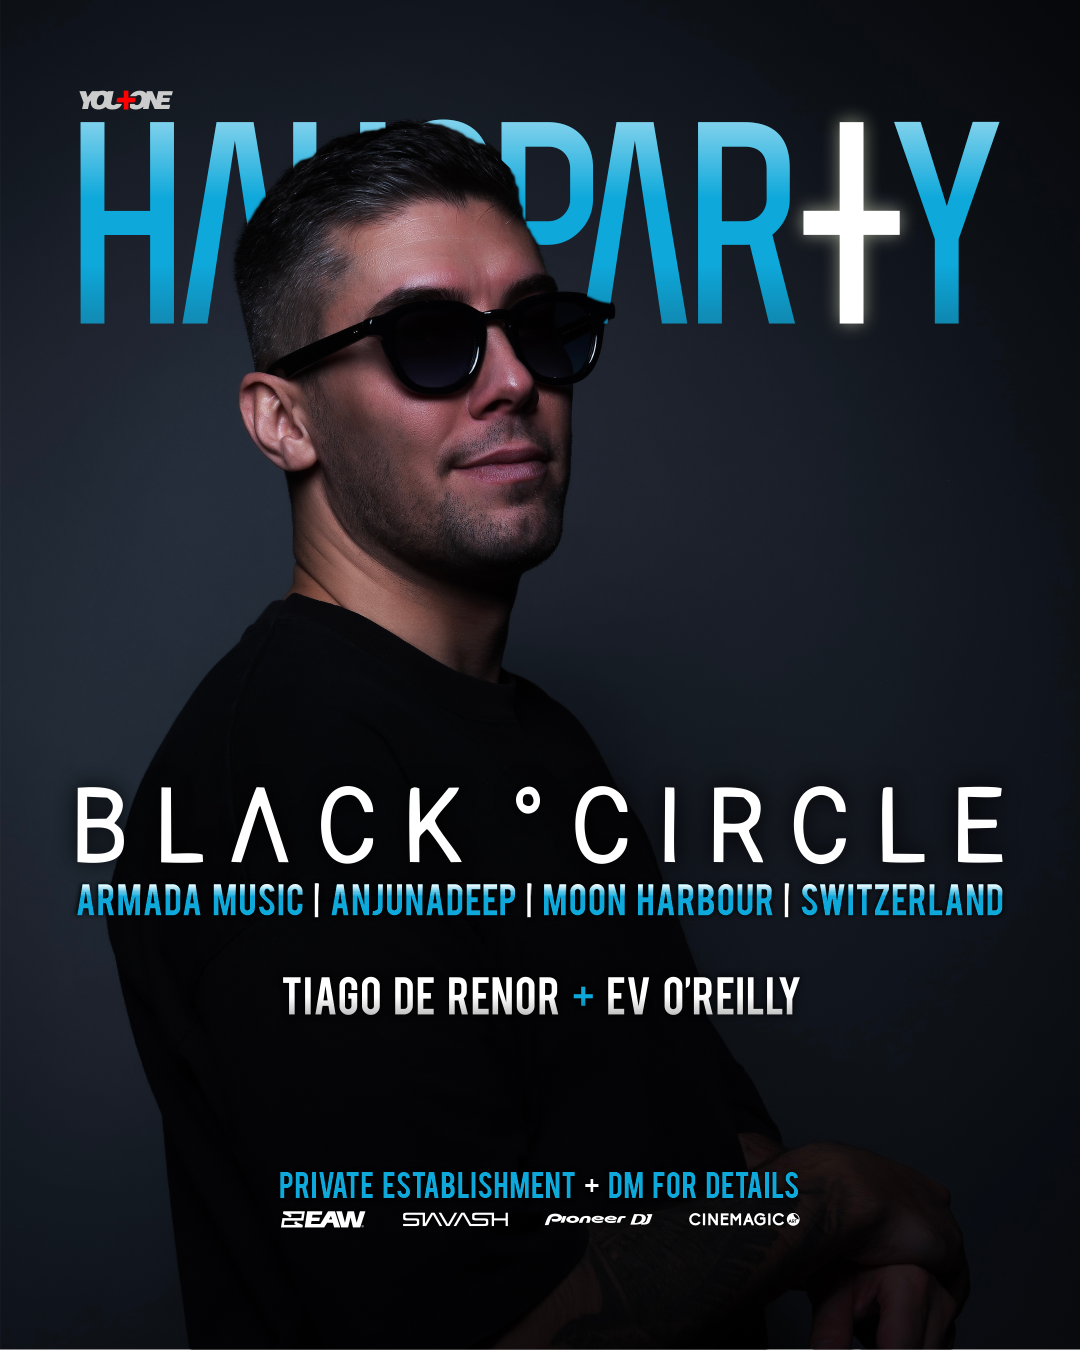 HAUSPARTY with Black Circle - フライヤー表